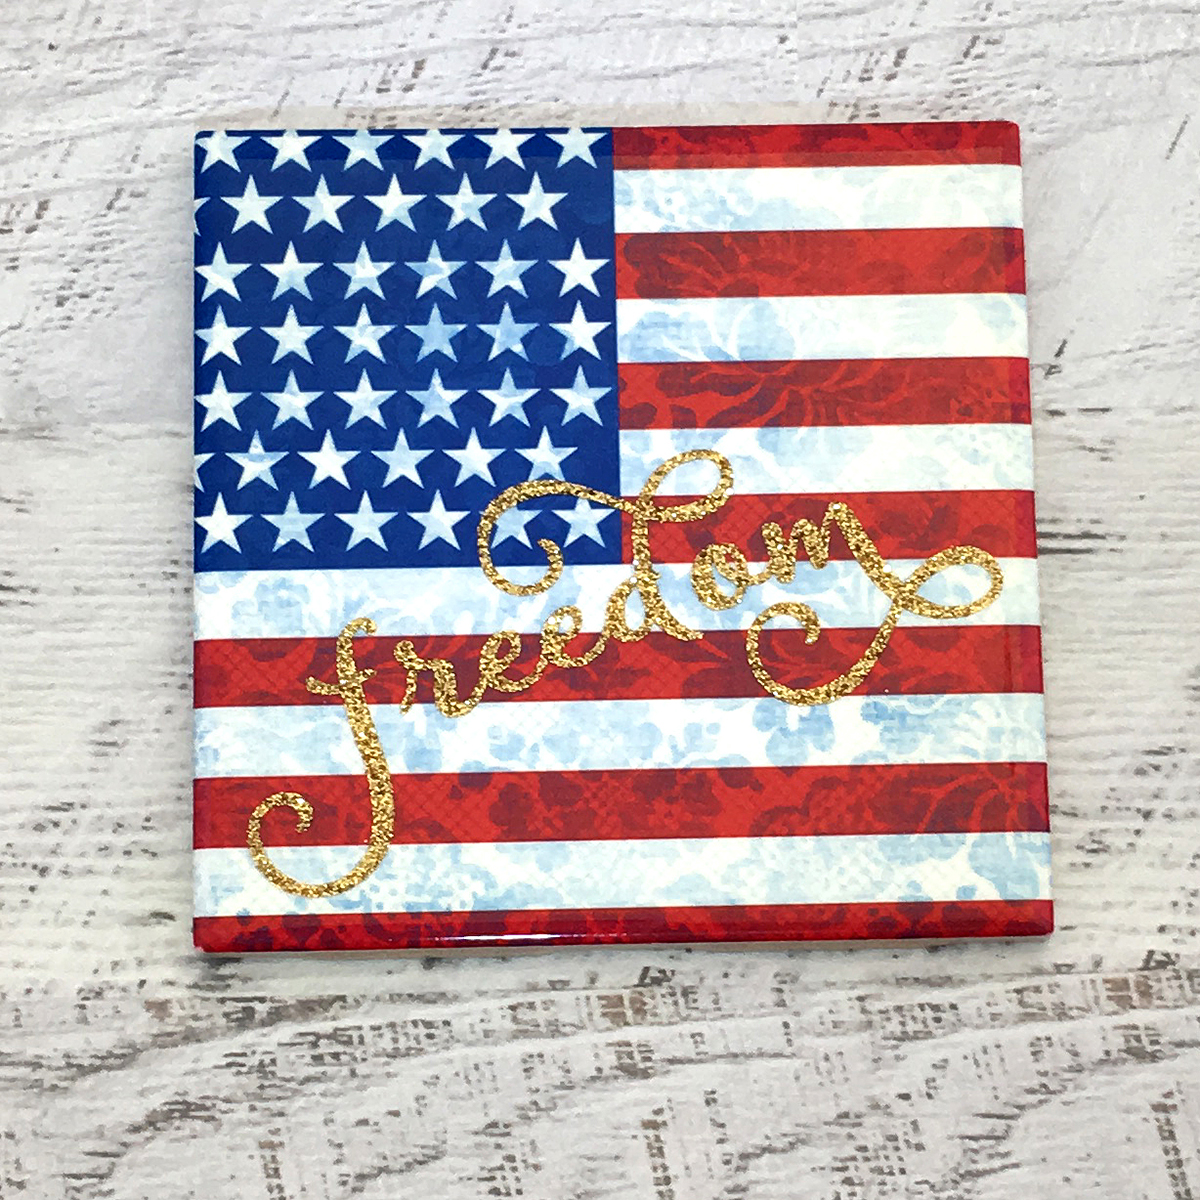 US Flag on a tile with the word Freedom in HTV glitter